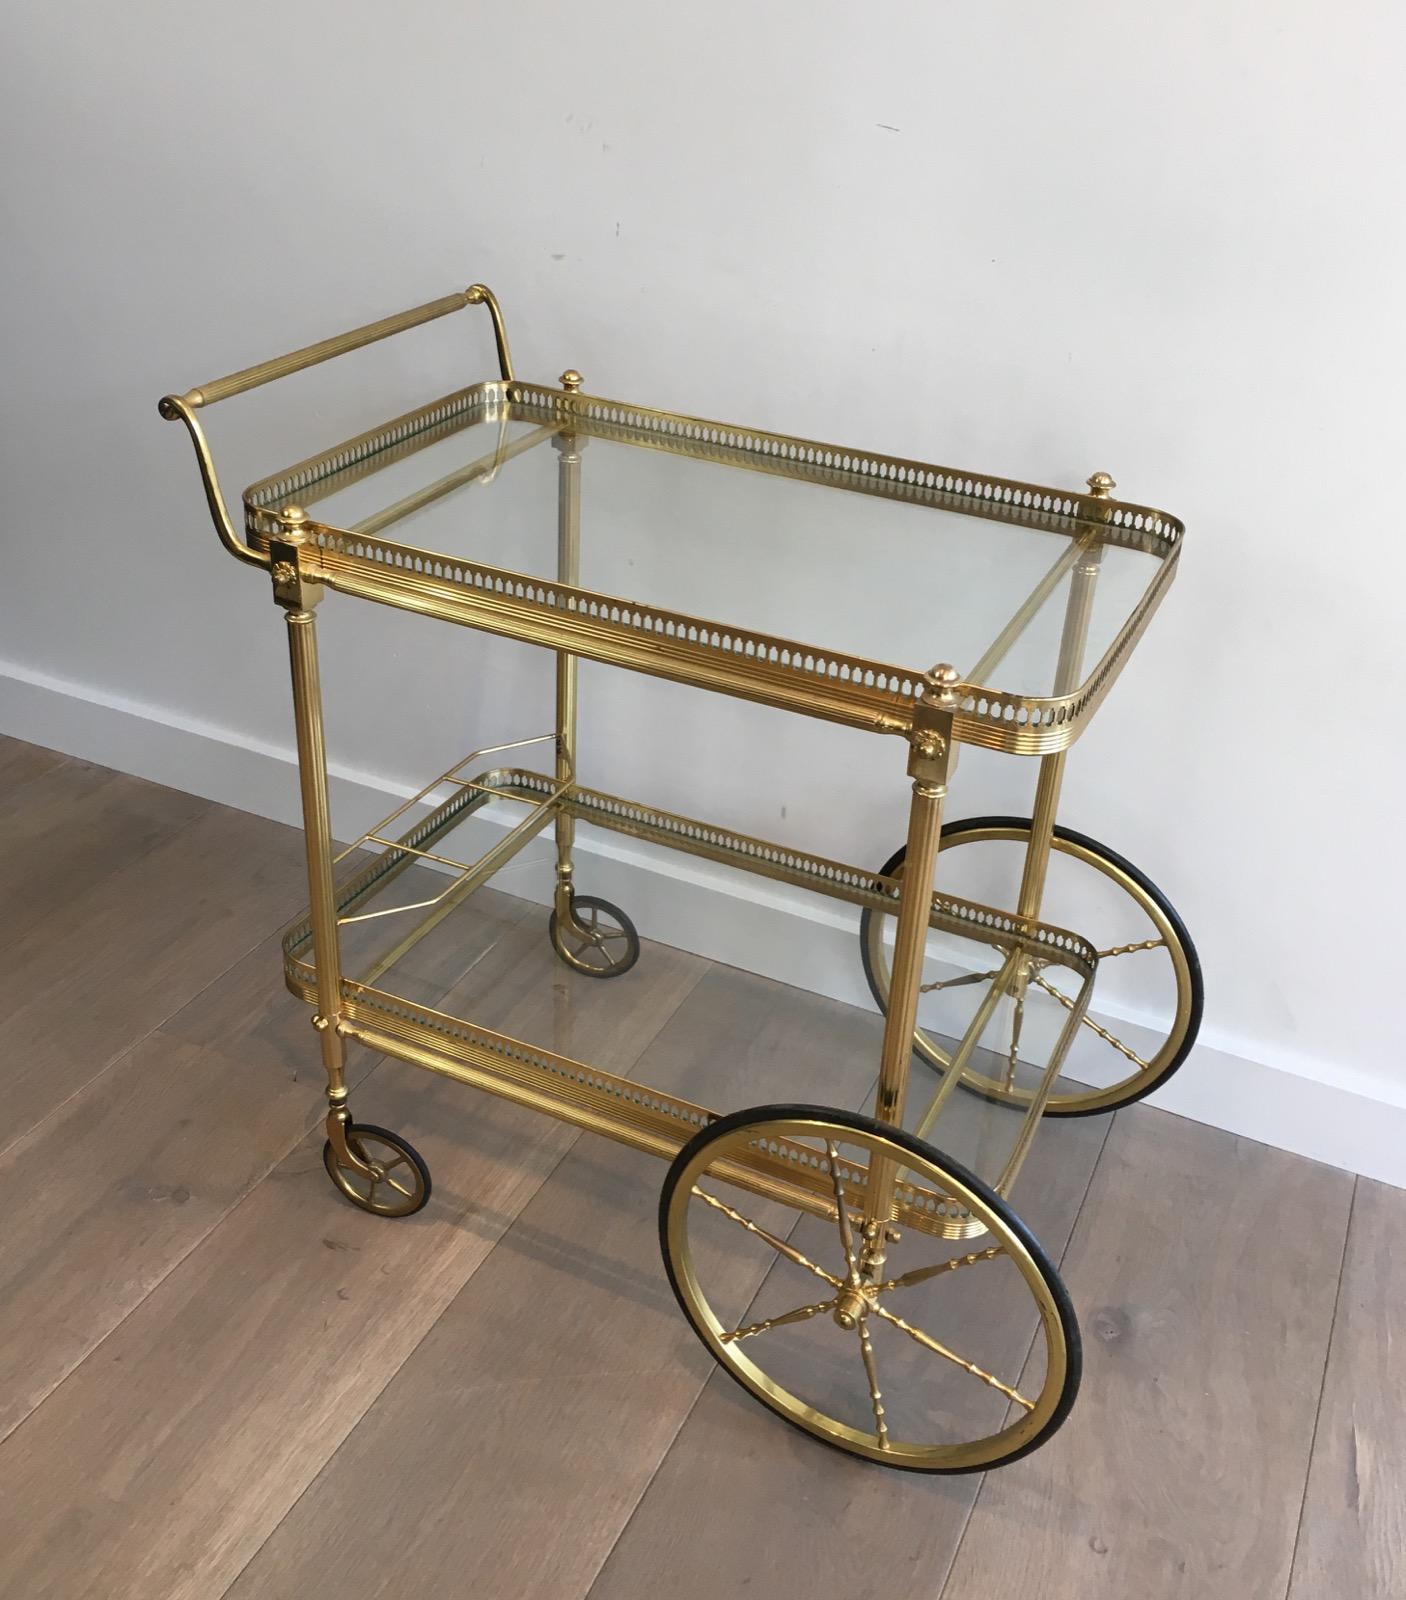 This neoclassical drinks trolley is made of brass with 2 glass shelves and a bottle holder on the bottom part. This is a French work, in the style of Maison Jansen, circa 1970.